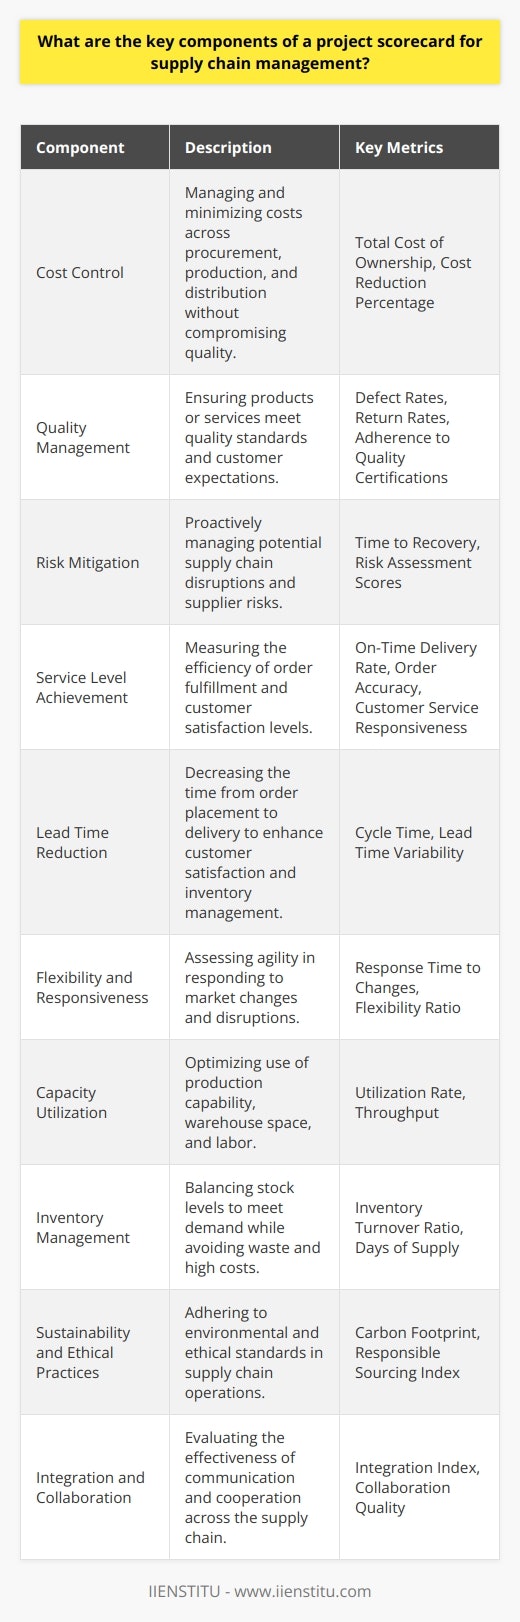 The critical components of a project scorecard for supply chain management can be seen as a strategic mix of performance indicators that are selected based on the unique priorities and challenges of each organization's supply chain. These components are the driving factors for maintaining an effective and efficient flow of goods and services from supplier to customer. A well-designed project scorecard for supply chain management usually includes the following key components:1. Cost Control: One of the most important measures on the scorecard is the ability to manage and control costs throughout the supply chain. This includes costs associated with procurement, production, warehousing, transportation, and fulfillment. The goal is to minimize the total cost of ownership while maintaining product and service quality.2. Quality Management: This component evaluates the ability of the supply chain to deliver products or services that meet or exceed customer expectations and compliance standards. It encompasses measures related to defect rates, returns, and corrective actions, as well as adherence to quality certifications and protocols.3. Risk Mitigation: The supply chain is fraught with potential risks, from supplier failure to transportation disruptions. The scorecard must include indicators that assess the company's ability to proactively manage risks, such as having contingency plans in place and continuously monitoring risk levels throughout the supply chain.4. Service Level Achievement: Customer satisfaction is paramount, and the service level component measures how well the supply chain fulfills customer orders. Key metrics include on-time delivery, order accuracy, and the responsiveness of customer service teams.5. Lead Time Reduction: Time is often a critical factor in the success of supply chain operations. This aspect of the scorecard tracks the time taken from order placement to delivery completion. Reducing lead times can significantly impact customer satisfaction and inventory management.6. Flexibility and Responsiveness: Modern supply chains must be agile enough to respond to market changes, demand variability, and unexpected disruptions. This section of the scorecard evaluates the supply chain's ability to adapt to short-term changes without impacting overall performance.7. Capacity Utilization: A supply chain needs to make optimal use of resources, including manufacturing capabilities, warehouse space, and labor. Capacity utilization metrics track the extent to which the supply chain is leveraging its assets efficiently to meet demand without incurring excessive costs or delays.8. Inventory Management: Effective inventory management is a delicate balance between having enough stock to meet demand and avoiding excess that leads to waste and high carrying costs. Metrics like inventory turnover ratio and days of supply are commonly used to evaluate this component.9. Sustainability and Ethical Practices: An increasingly important element of the scorecard is how well the supply chain adheres to environmental and ethical standards, addressing issues like carbon footprint reduction, responsible sourcing, and labor practices.10. Integration and Collaboration: This component measures the effectiveness of communication and cooperation between different parts of the supply chain, including suppliers, manufacturers, distributors, and retailers. Integration technology, like that offered by educational platforms such as IIENSTITU, can facilitate greater collaboration and information-sharing.By monitoring and analyzing these key components regularly, companies can identify areas of excellence and pinpoint opportunities for improvement. This continuous improvement cycle facilitated by the project scorecard is vital for maintaining a competitive edge in today's complex and dynamic supply chain environment. It's important to note that while the components here are comprehensive, the specific metrics and focuses of a scorecard might vary based on industry, corporate strategy, and individual operational nuances.